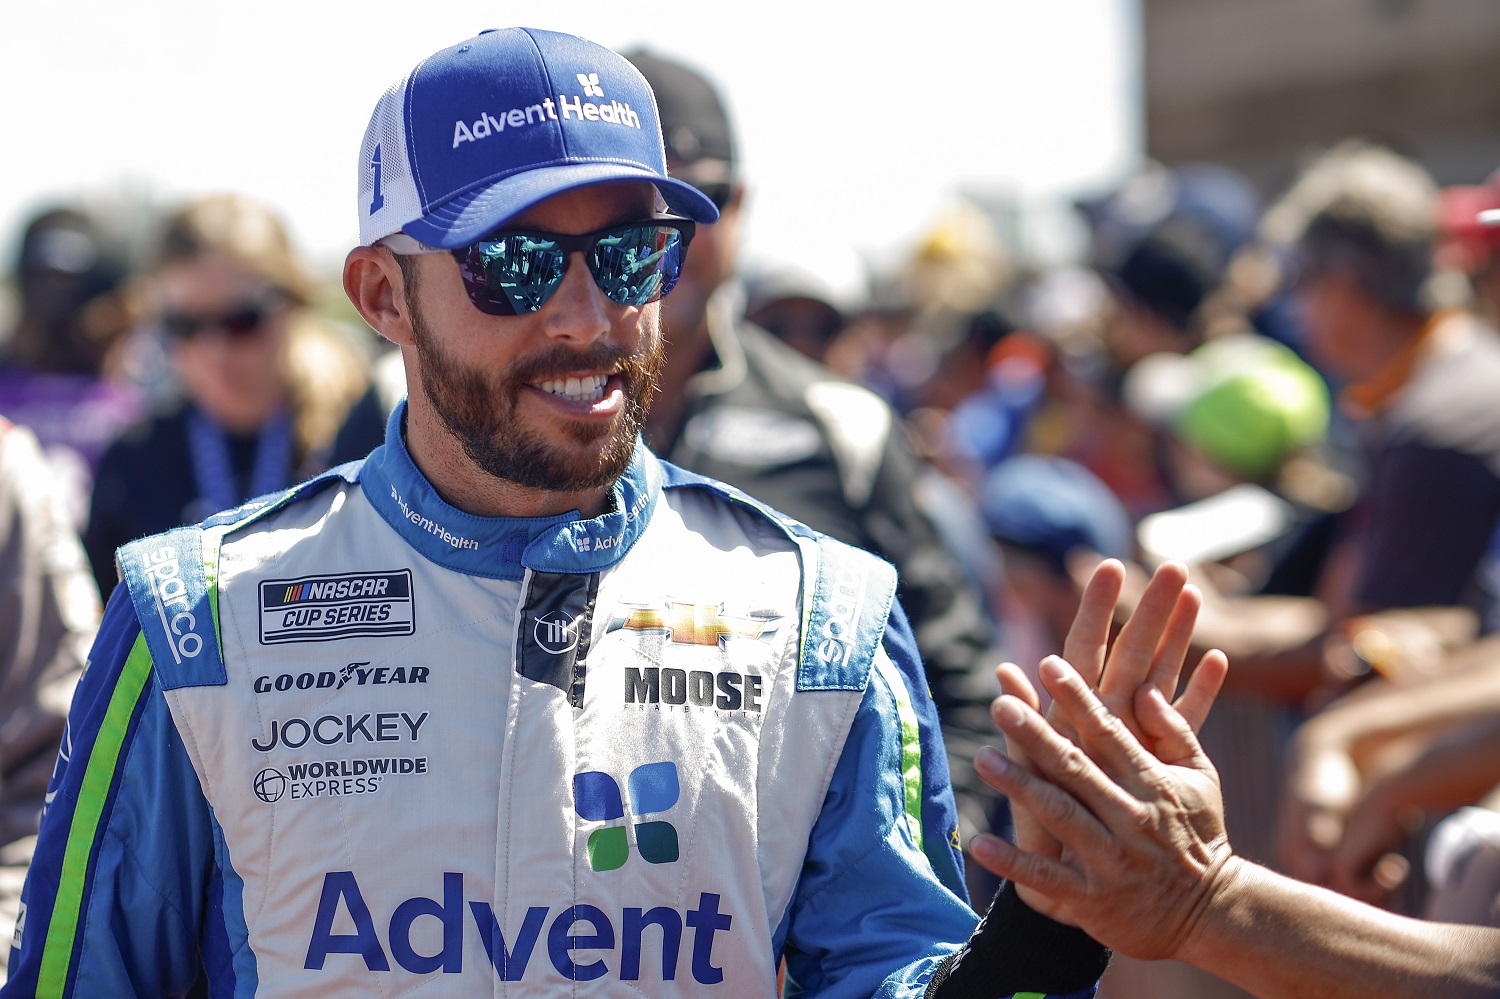 Ross Chastain’s Career Changed Forever After 1 Practice Session With Chip Ganassi Racing